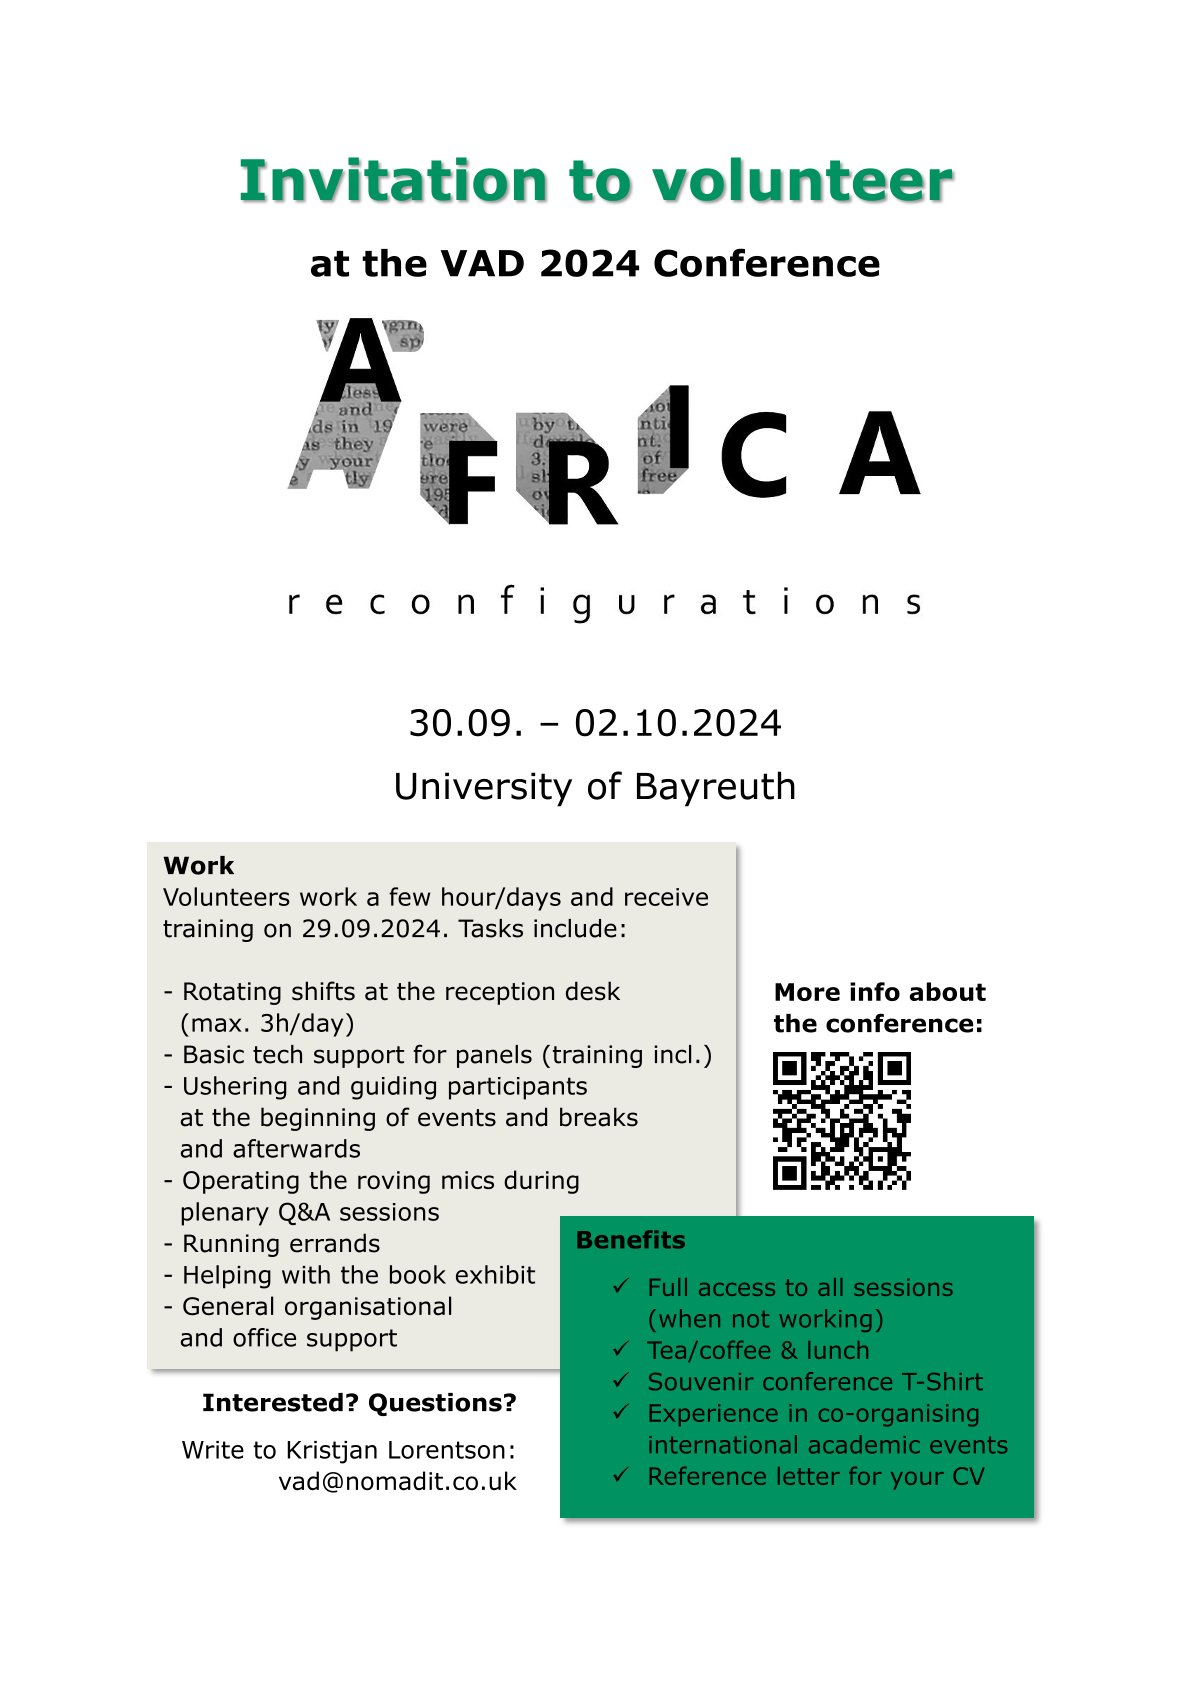 Invitation to volunteer at the VAD 2024 Conference